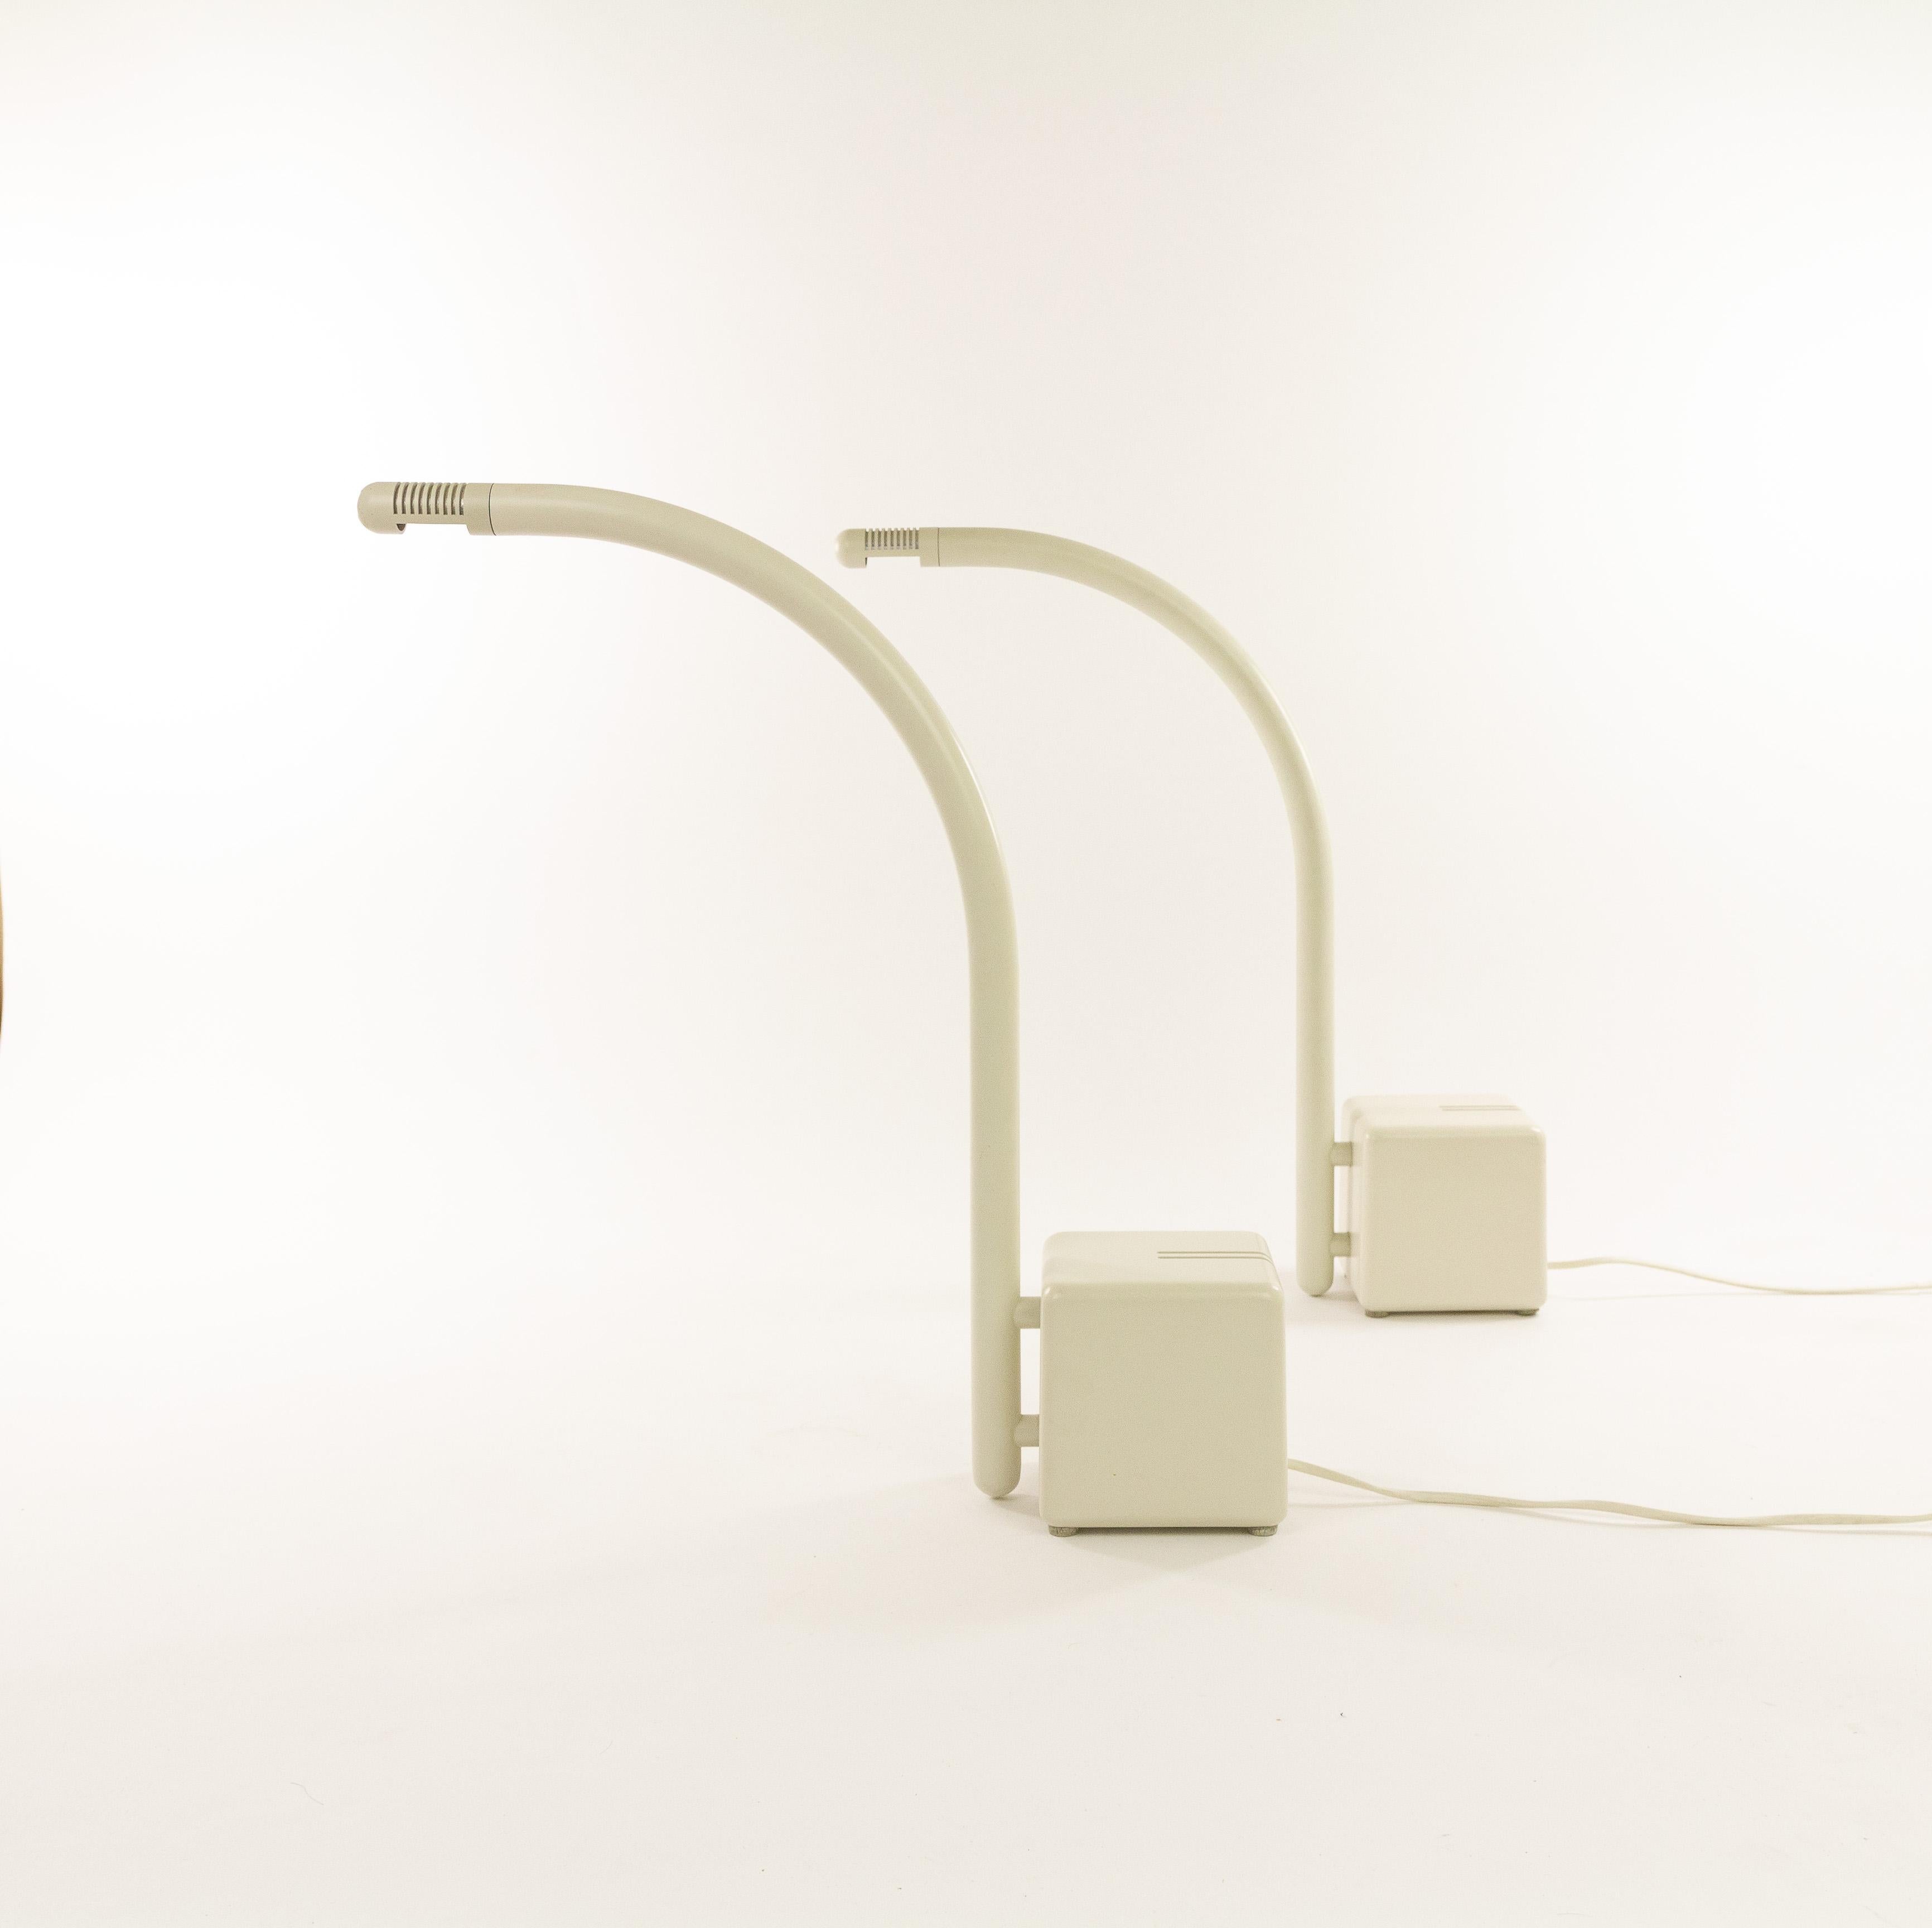 Mid-Century Modern Pair of Table Lamps by Claus Bonderup & Torsten Thorup for Focus, Denmark, 1970 For Sale